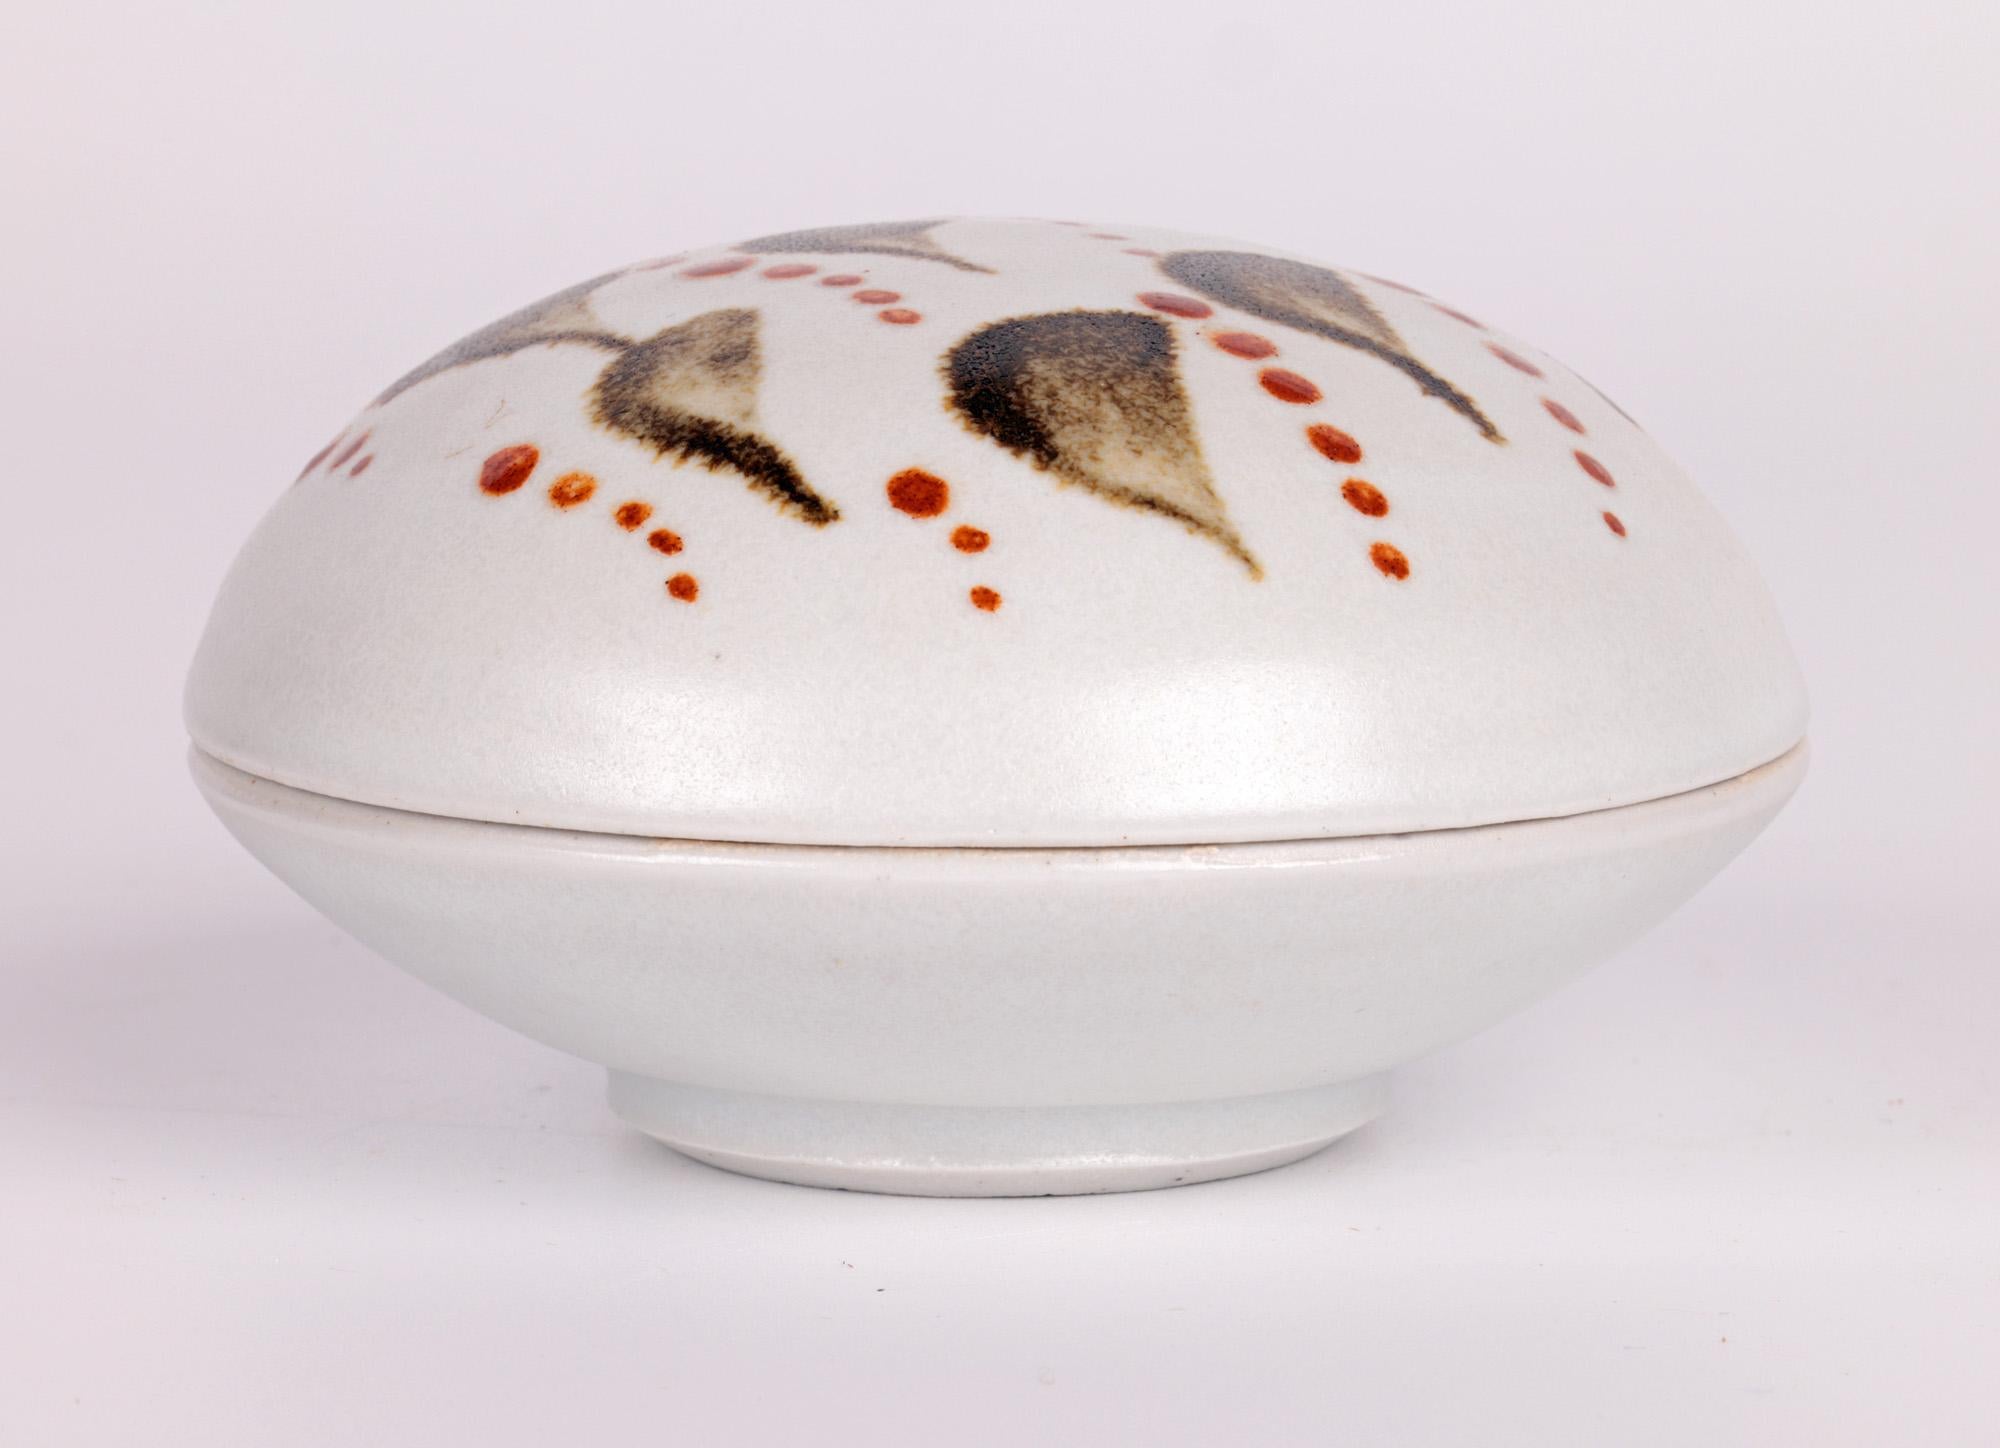 Amanda Brier Leach Pottery Porcelain Lidded Box with Stylized Leaf Patterning  For Sale 6